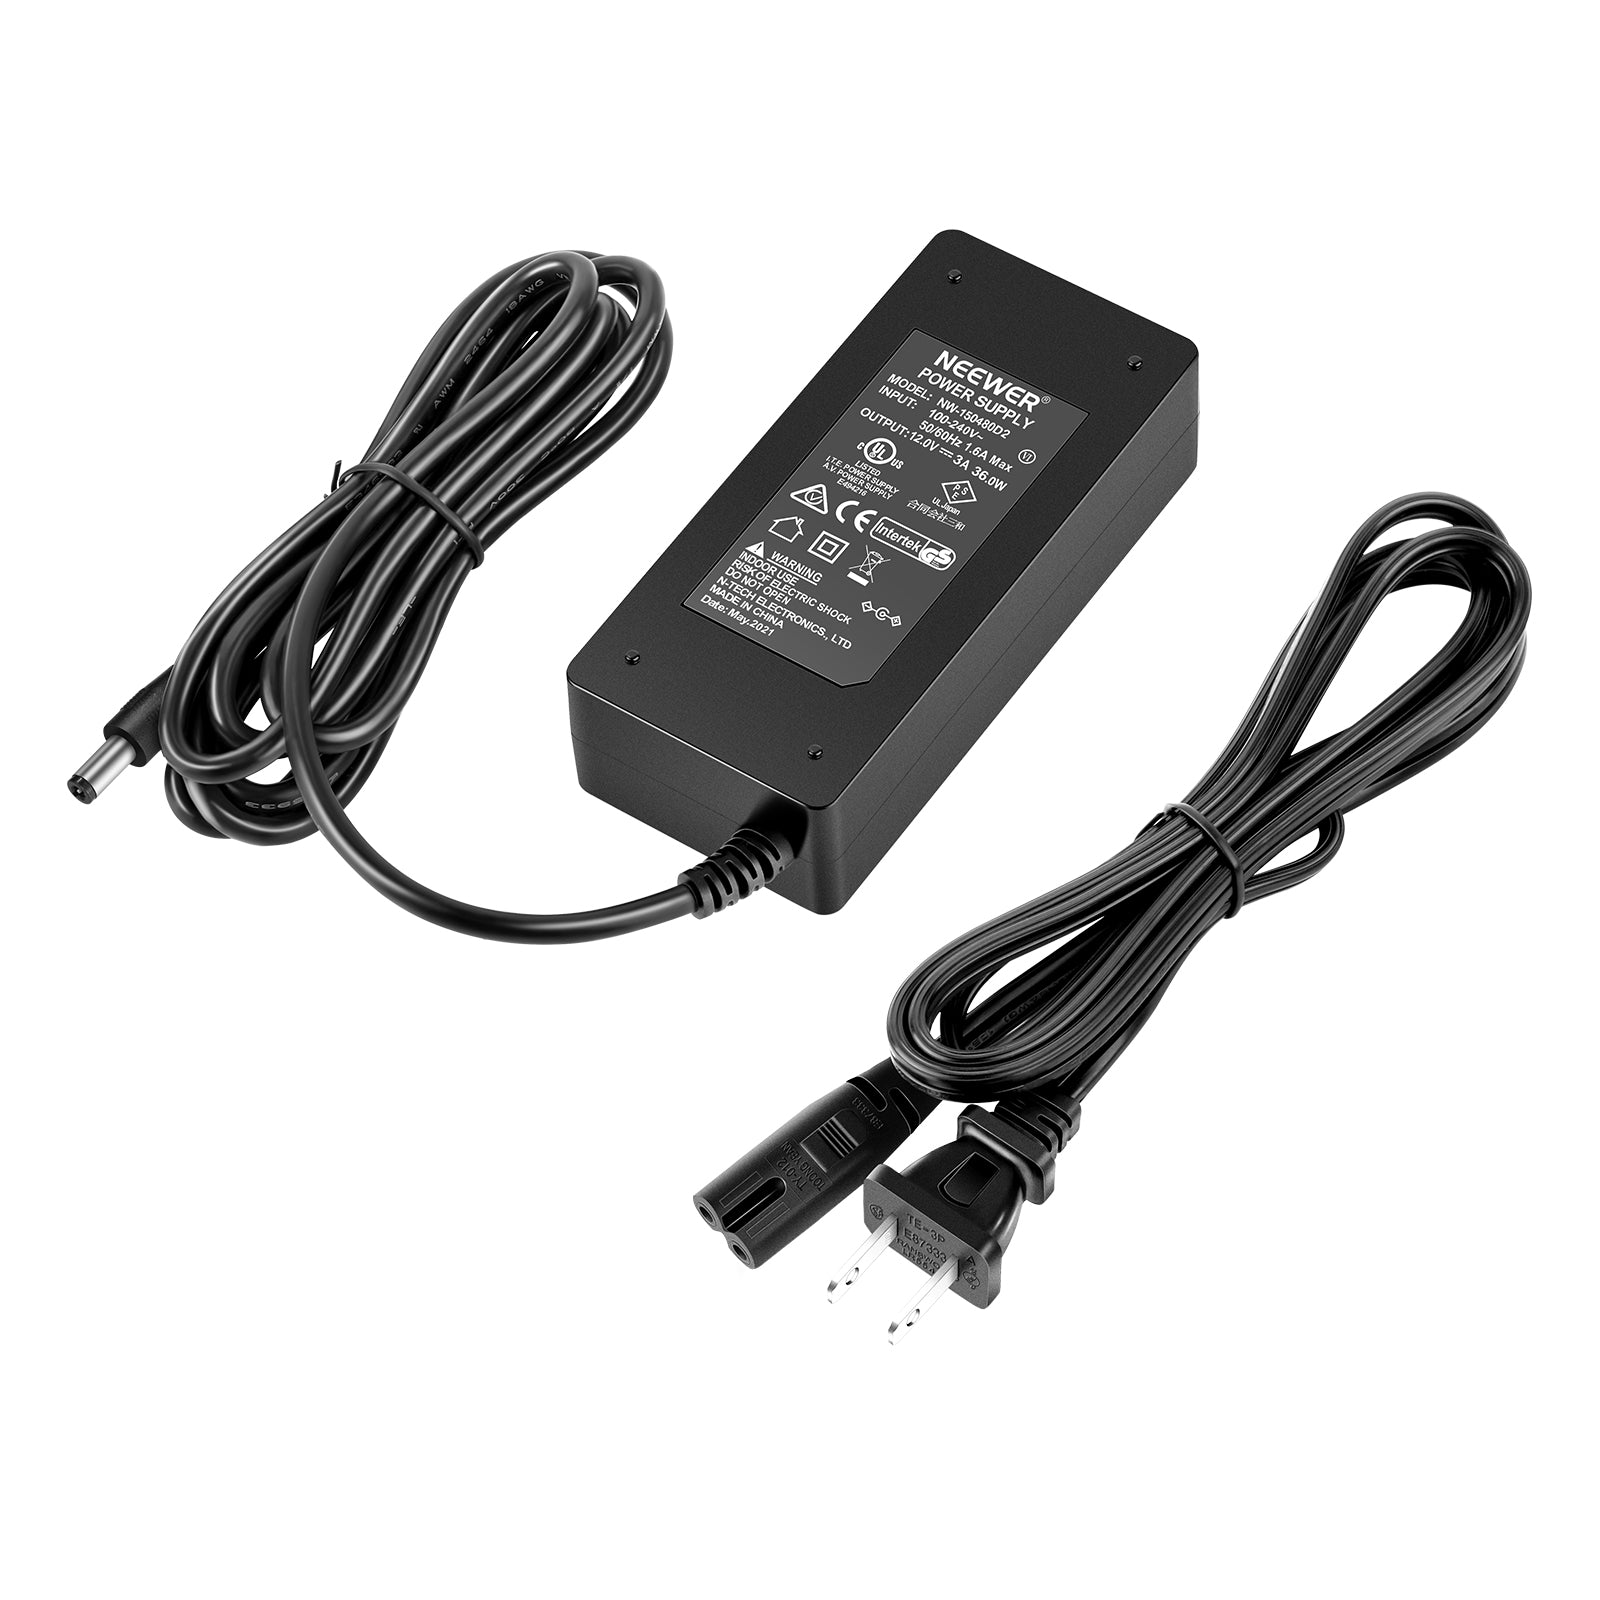 60W AC DC 12V 5A Power Supply Adapter 5.5X2.5mm 60W Charger with 8